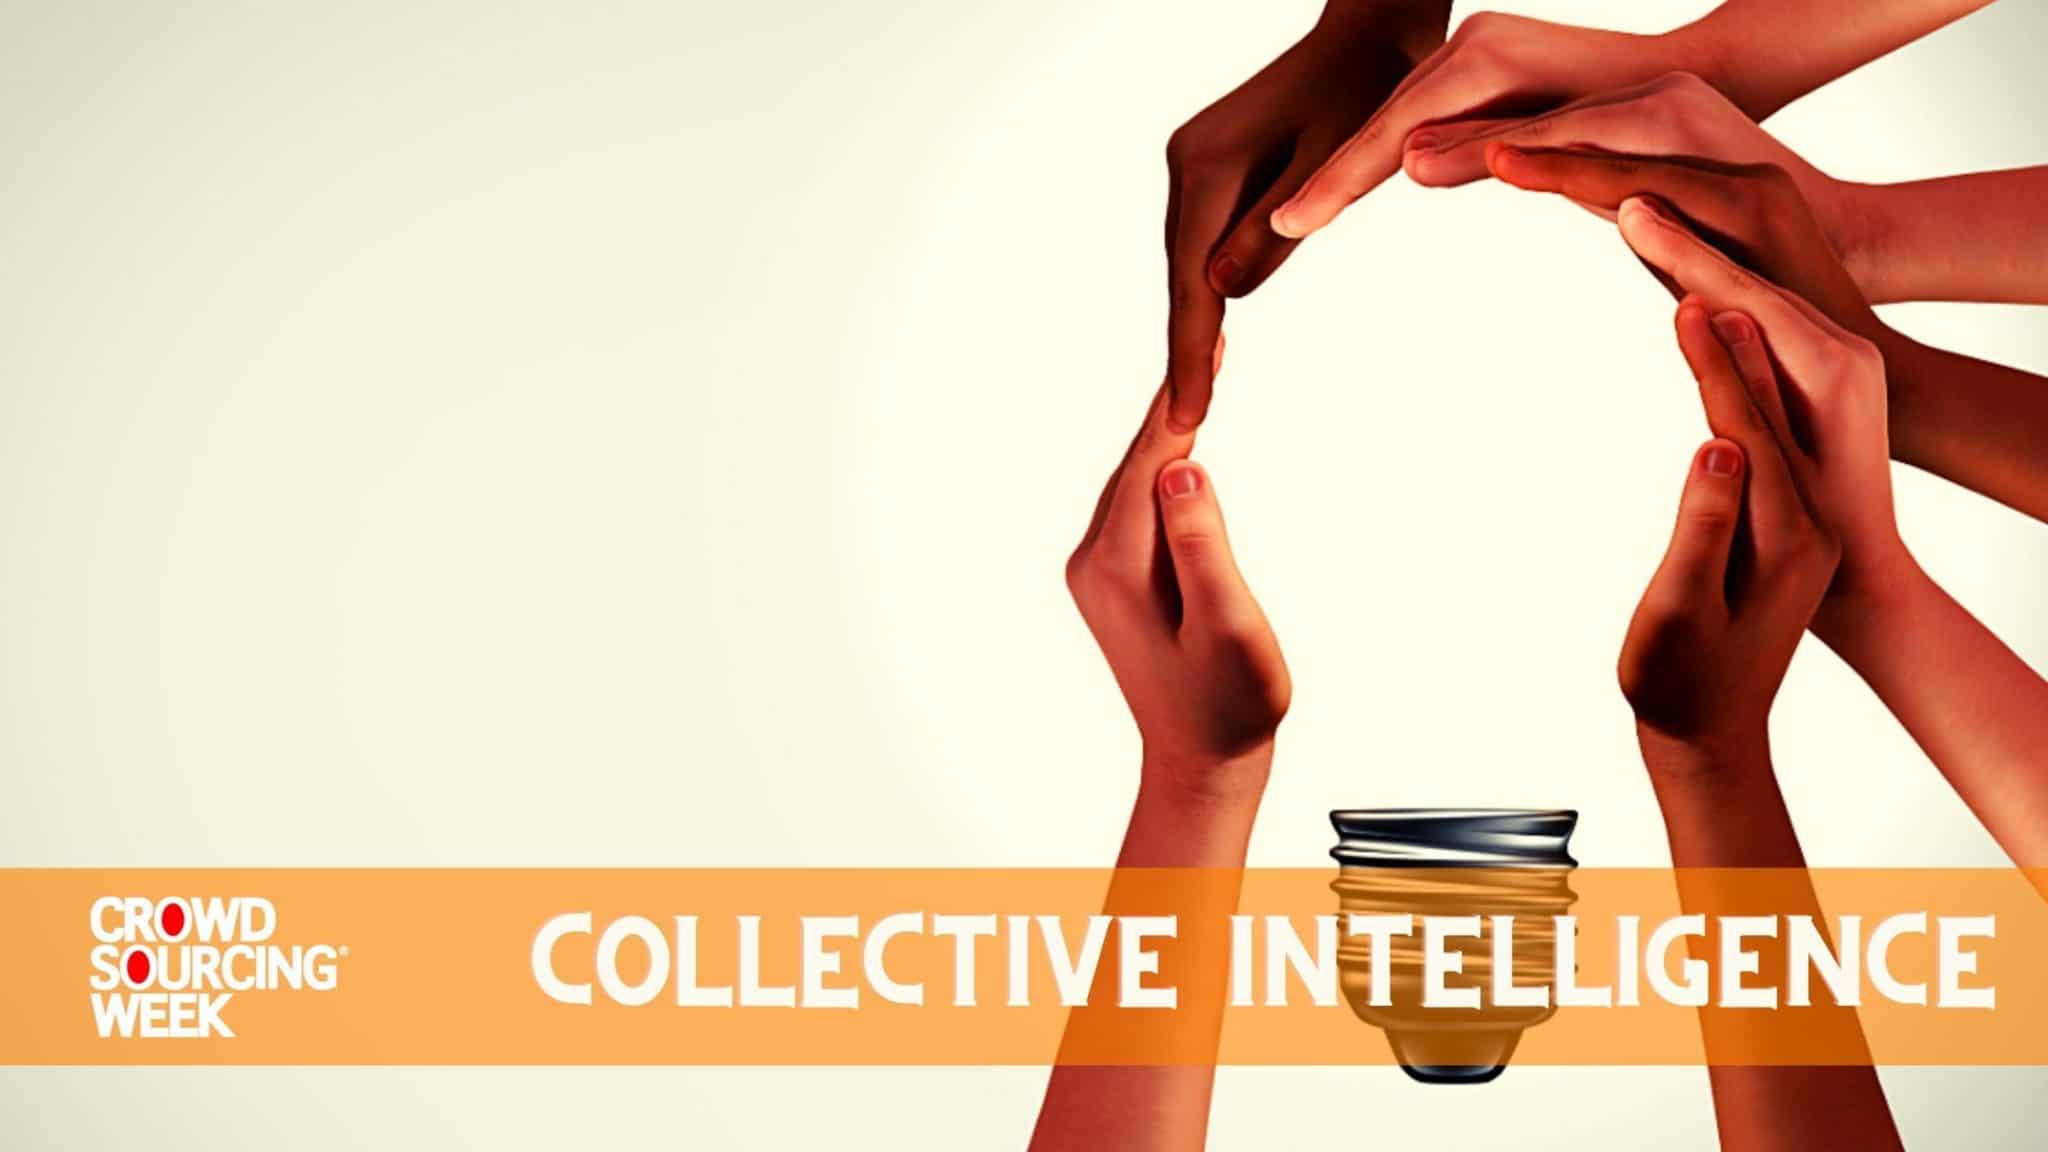 How to Unlock Collective Intelligence and Boost Staff Retention through Empowering Employees - Crowdsourcing Week